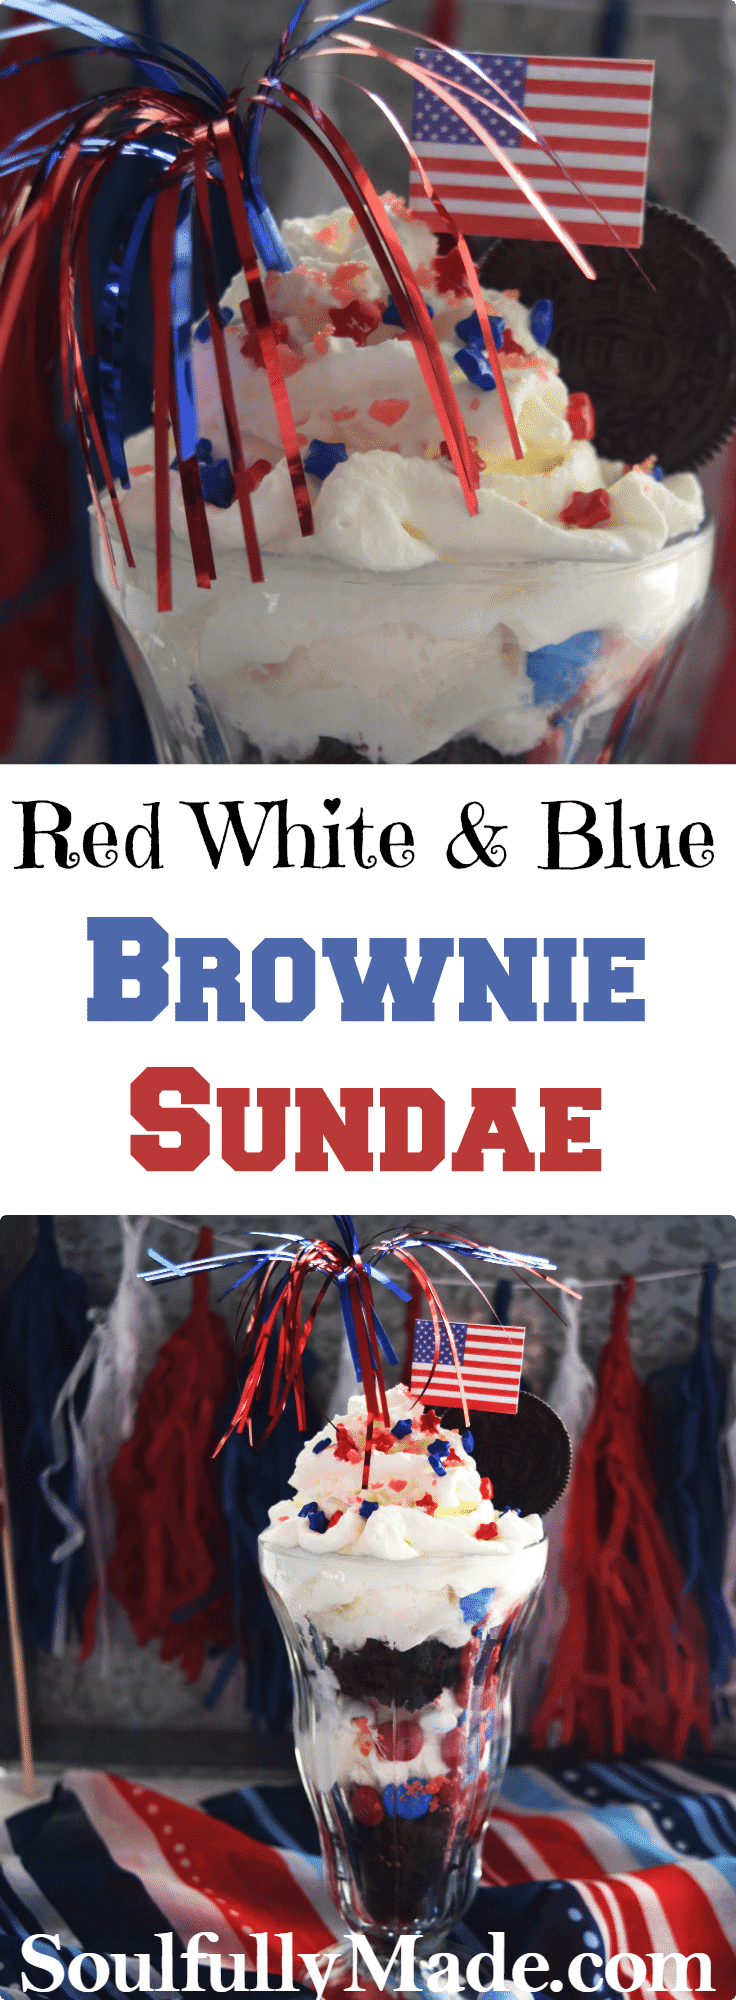 the pinterest image for this red white and blue brownie sundae recipe